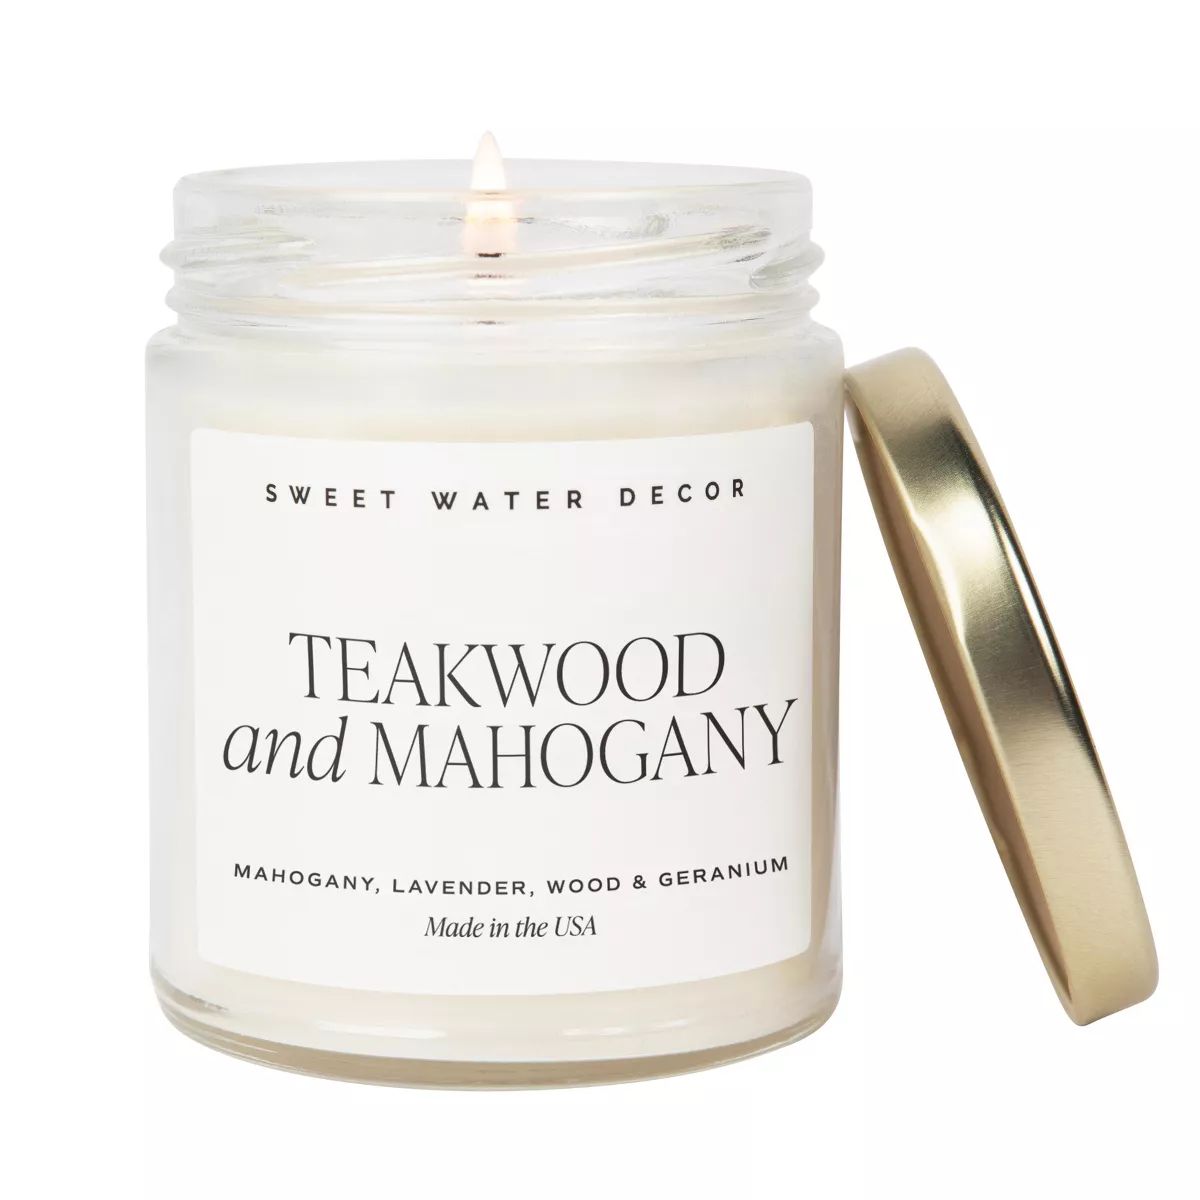 Sweet Water Decor Teakwood and Mahogany 9oz Clear Jar Soy Candle | Target